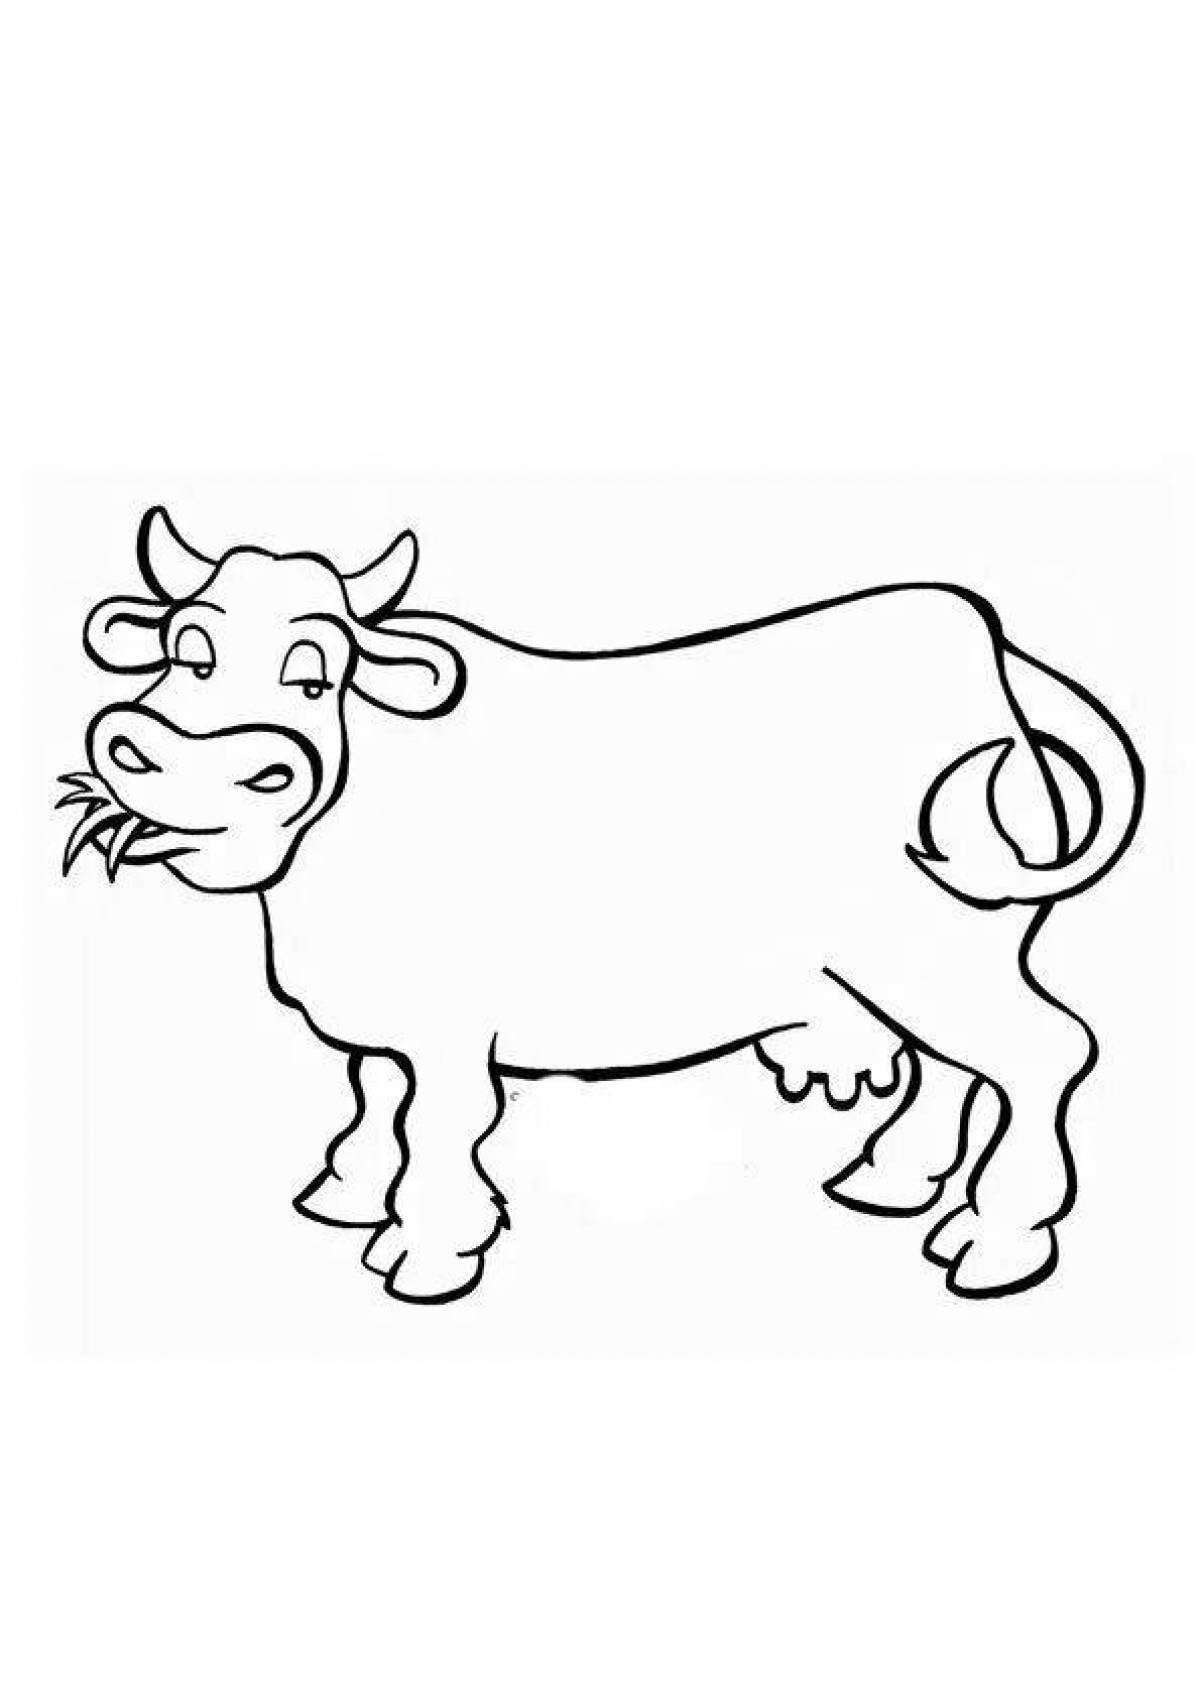 Coloring page calm cow